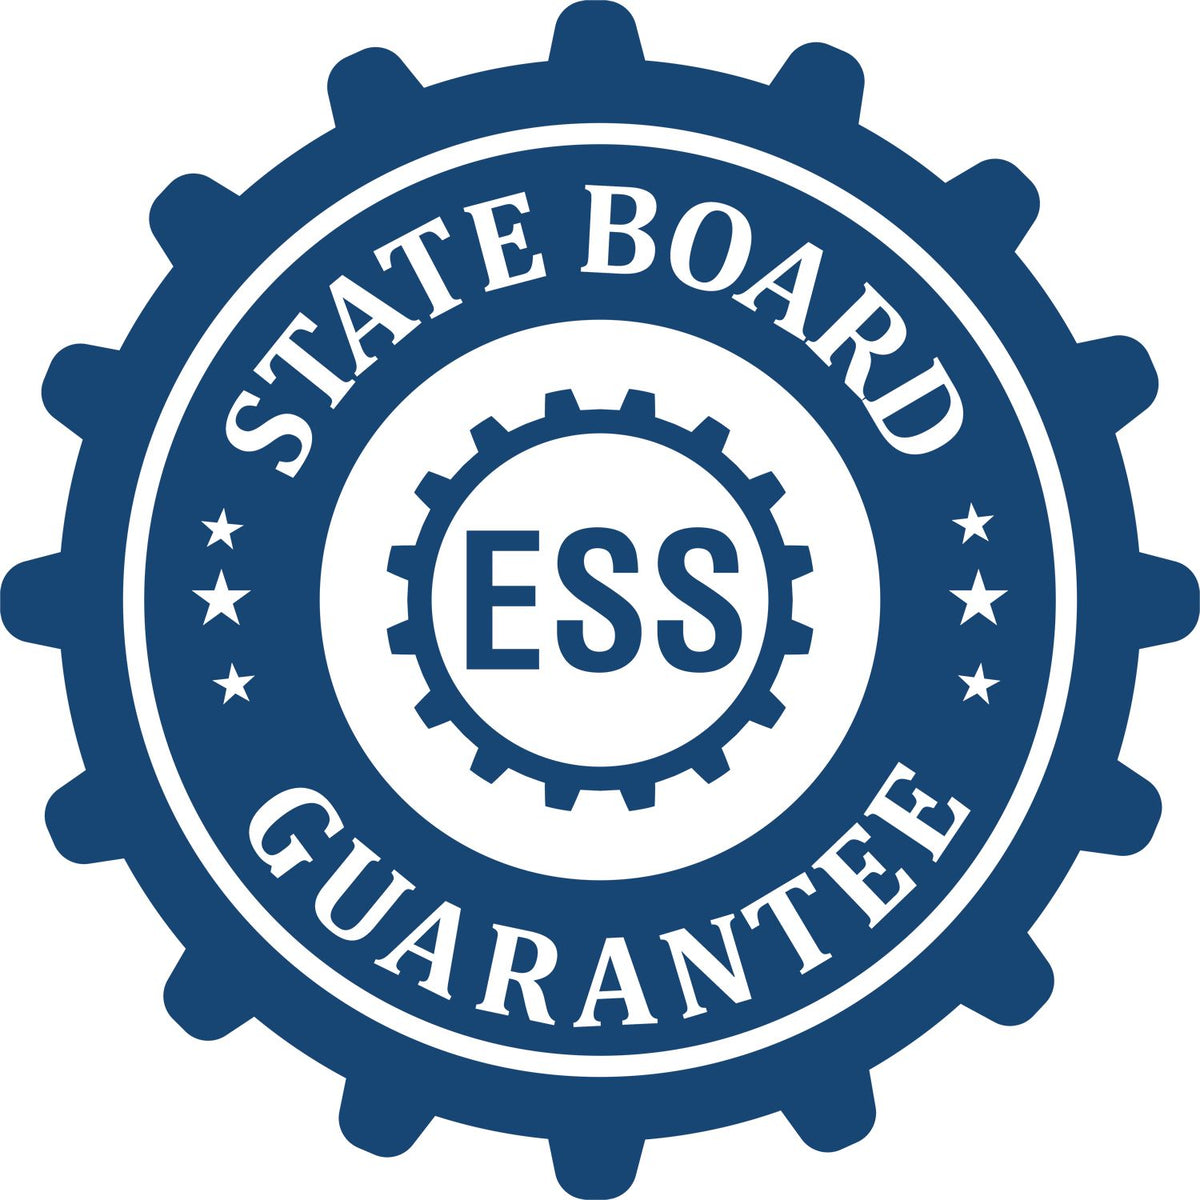 An emblem in a gear shape illustrating a state board guarantee for the State of Mississippi Extended Long Reach Geologist Seal